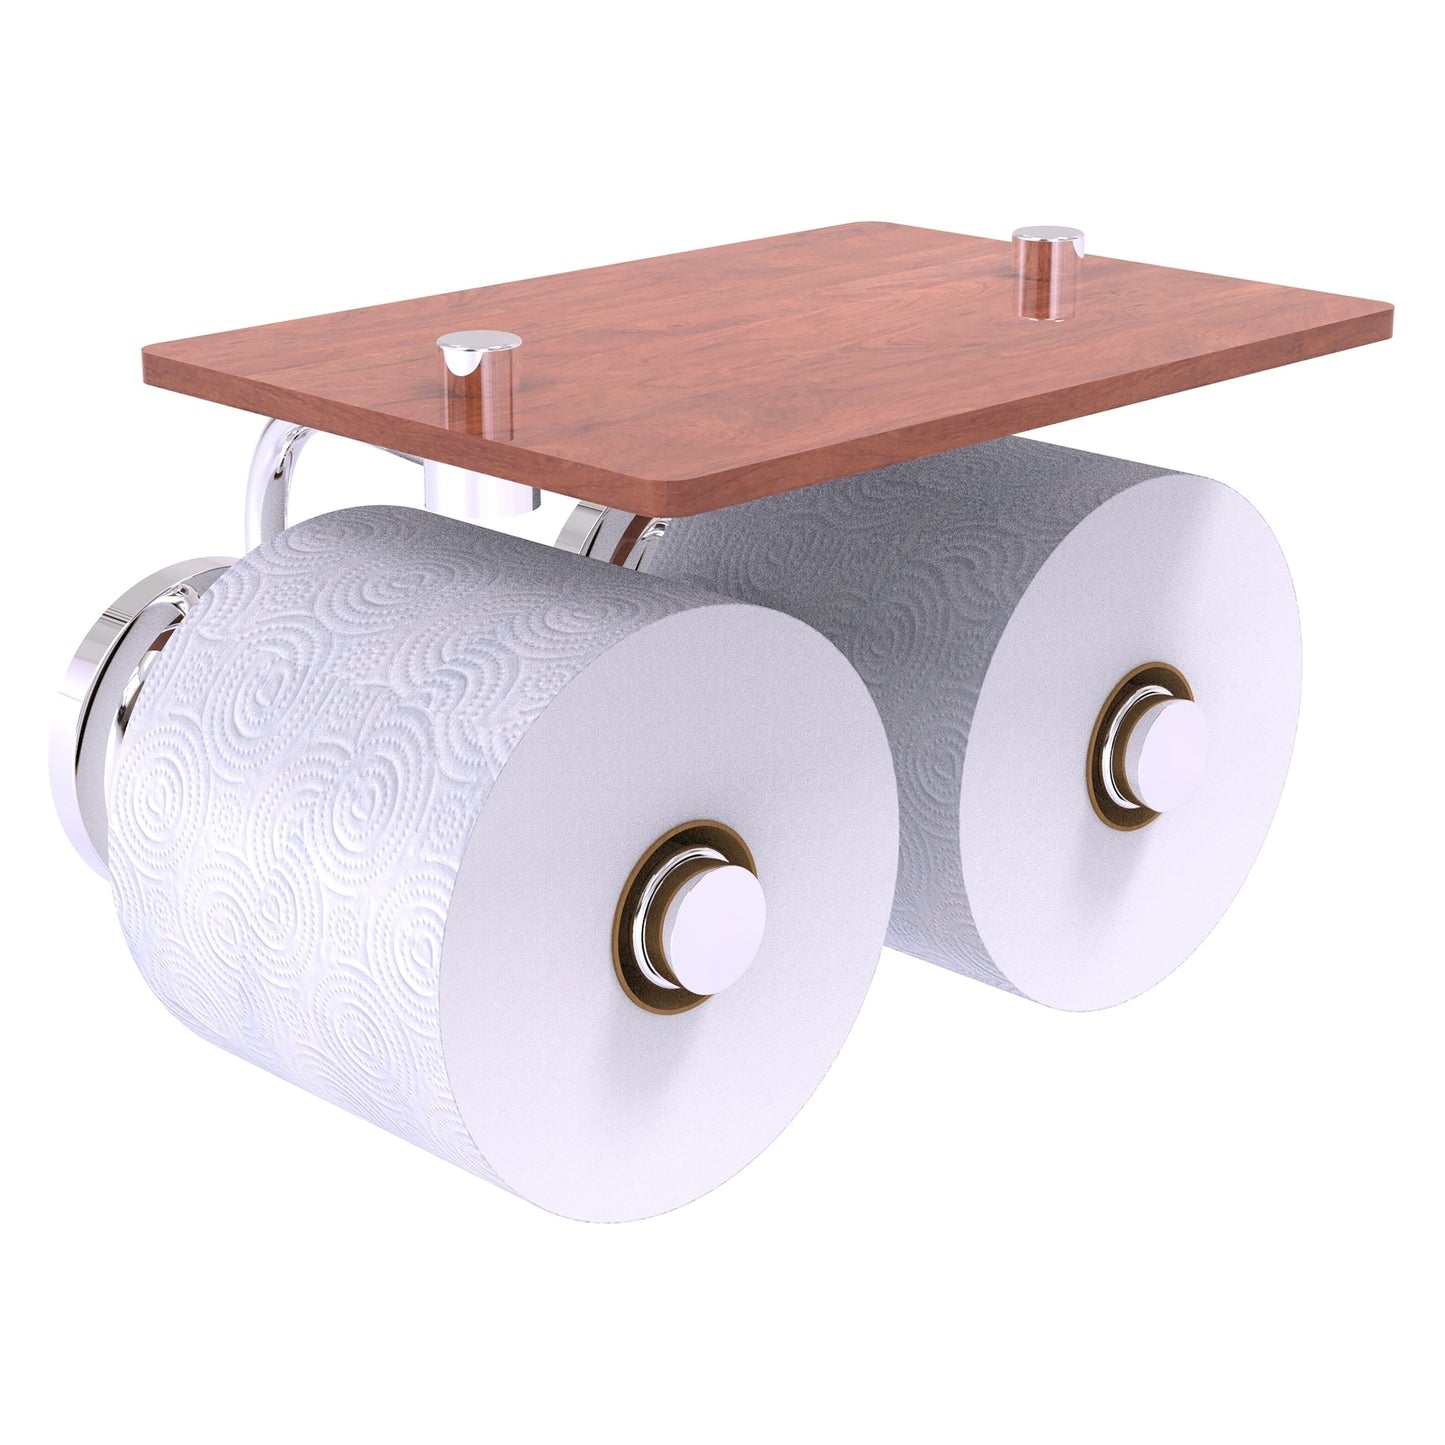 Allied Brass Que New 8.5" x 7.4" Polished Chrome Solid Brass 2-Roll Toilet Paper Holder With Wood Shelf